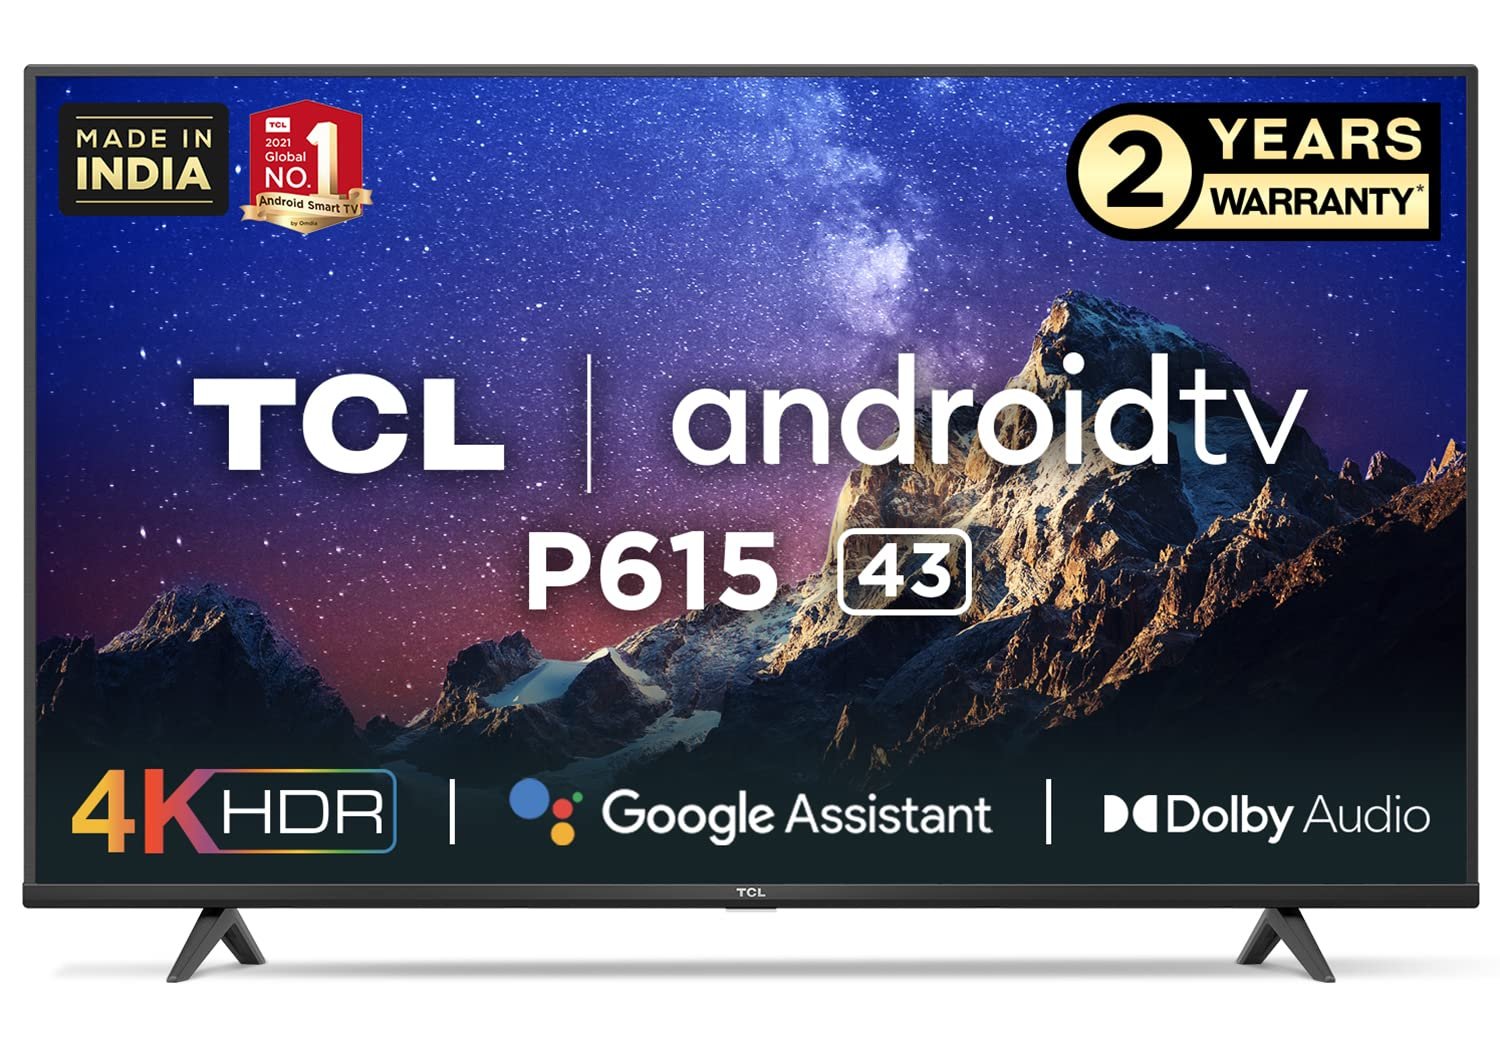 TCL 108 cm (43 inches) 4K Ultra HD Certified Android Smart LED TV 43P615 (Black)